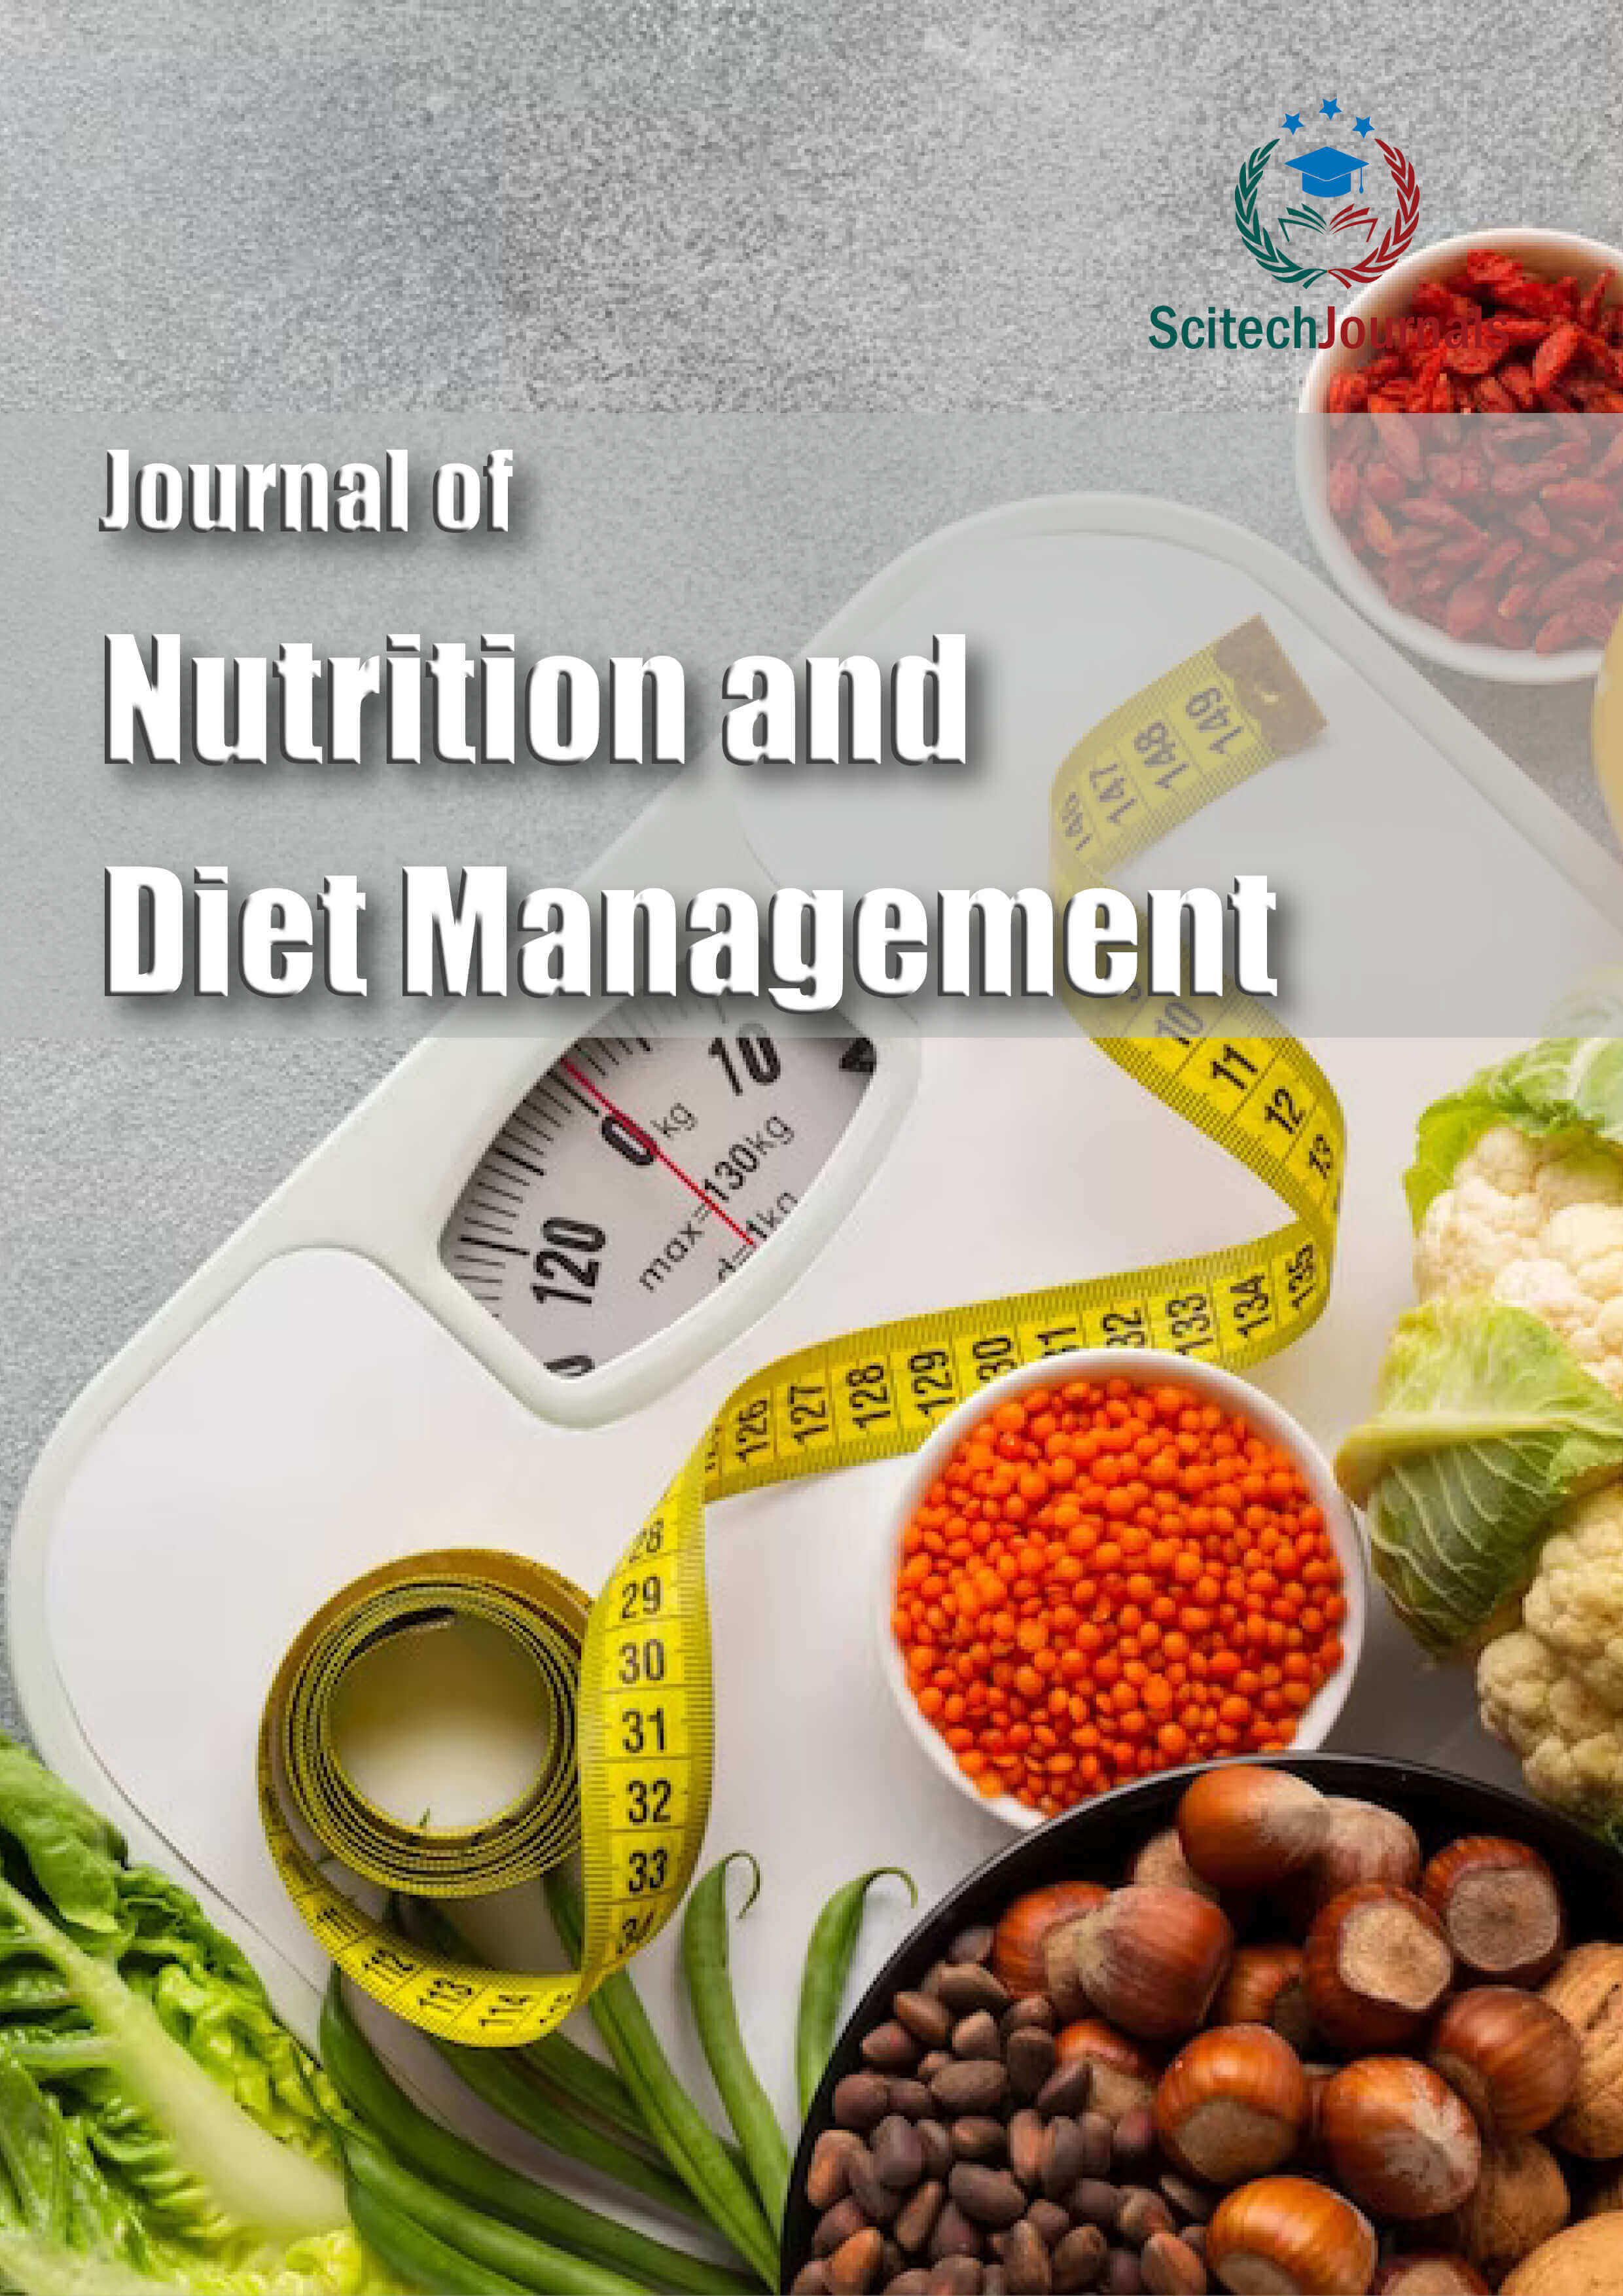 Journal of Nutrition and Diet Management